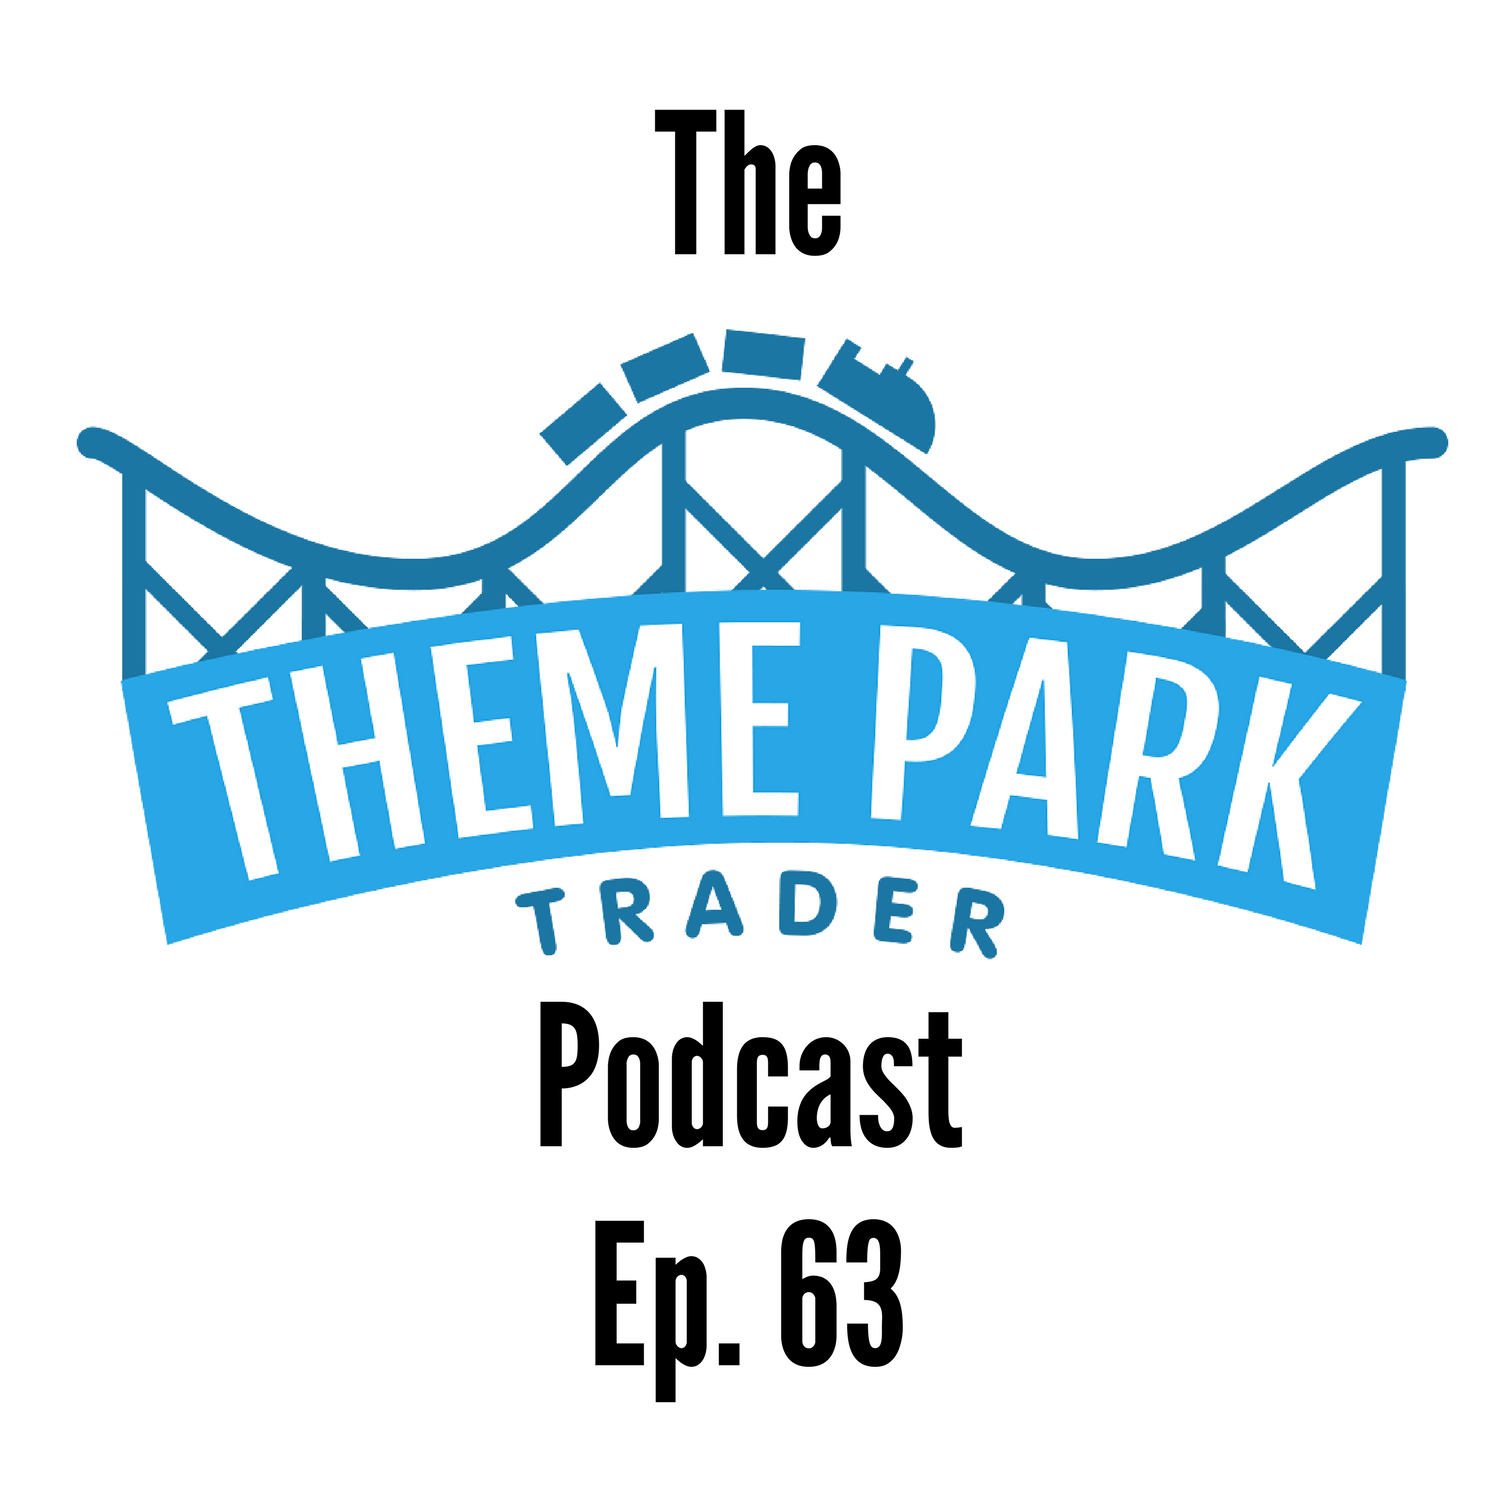  Episode 63 - Charlie Joins Us to Discuss Disney Parks, Tron Coaster Coming to WDW, Disneyland Paris 25th Anniversary Discussions!